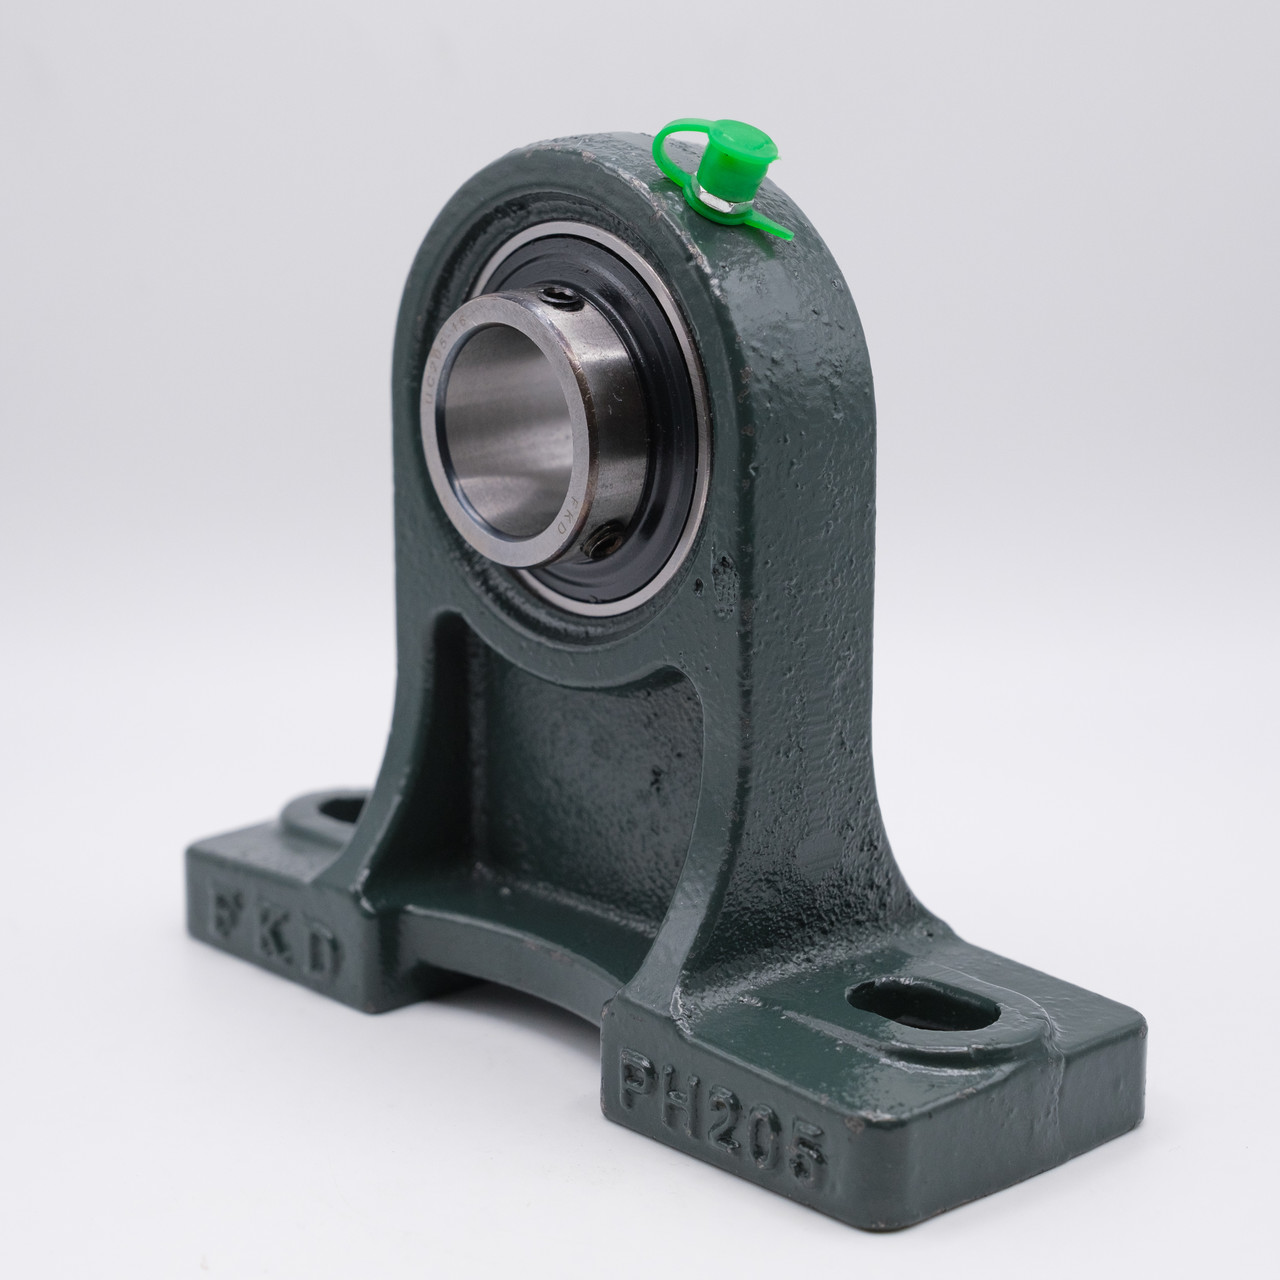 UCPH204 GENERIC 20mm Normal duty 2 Bolt Cast Iron Pillow Block Housed Unit Bearing with extended base to centre height - Metric Thumbnail